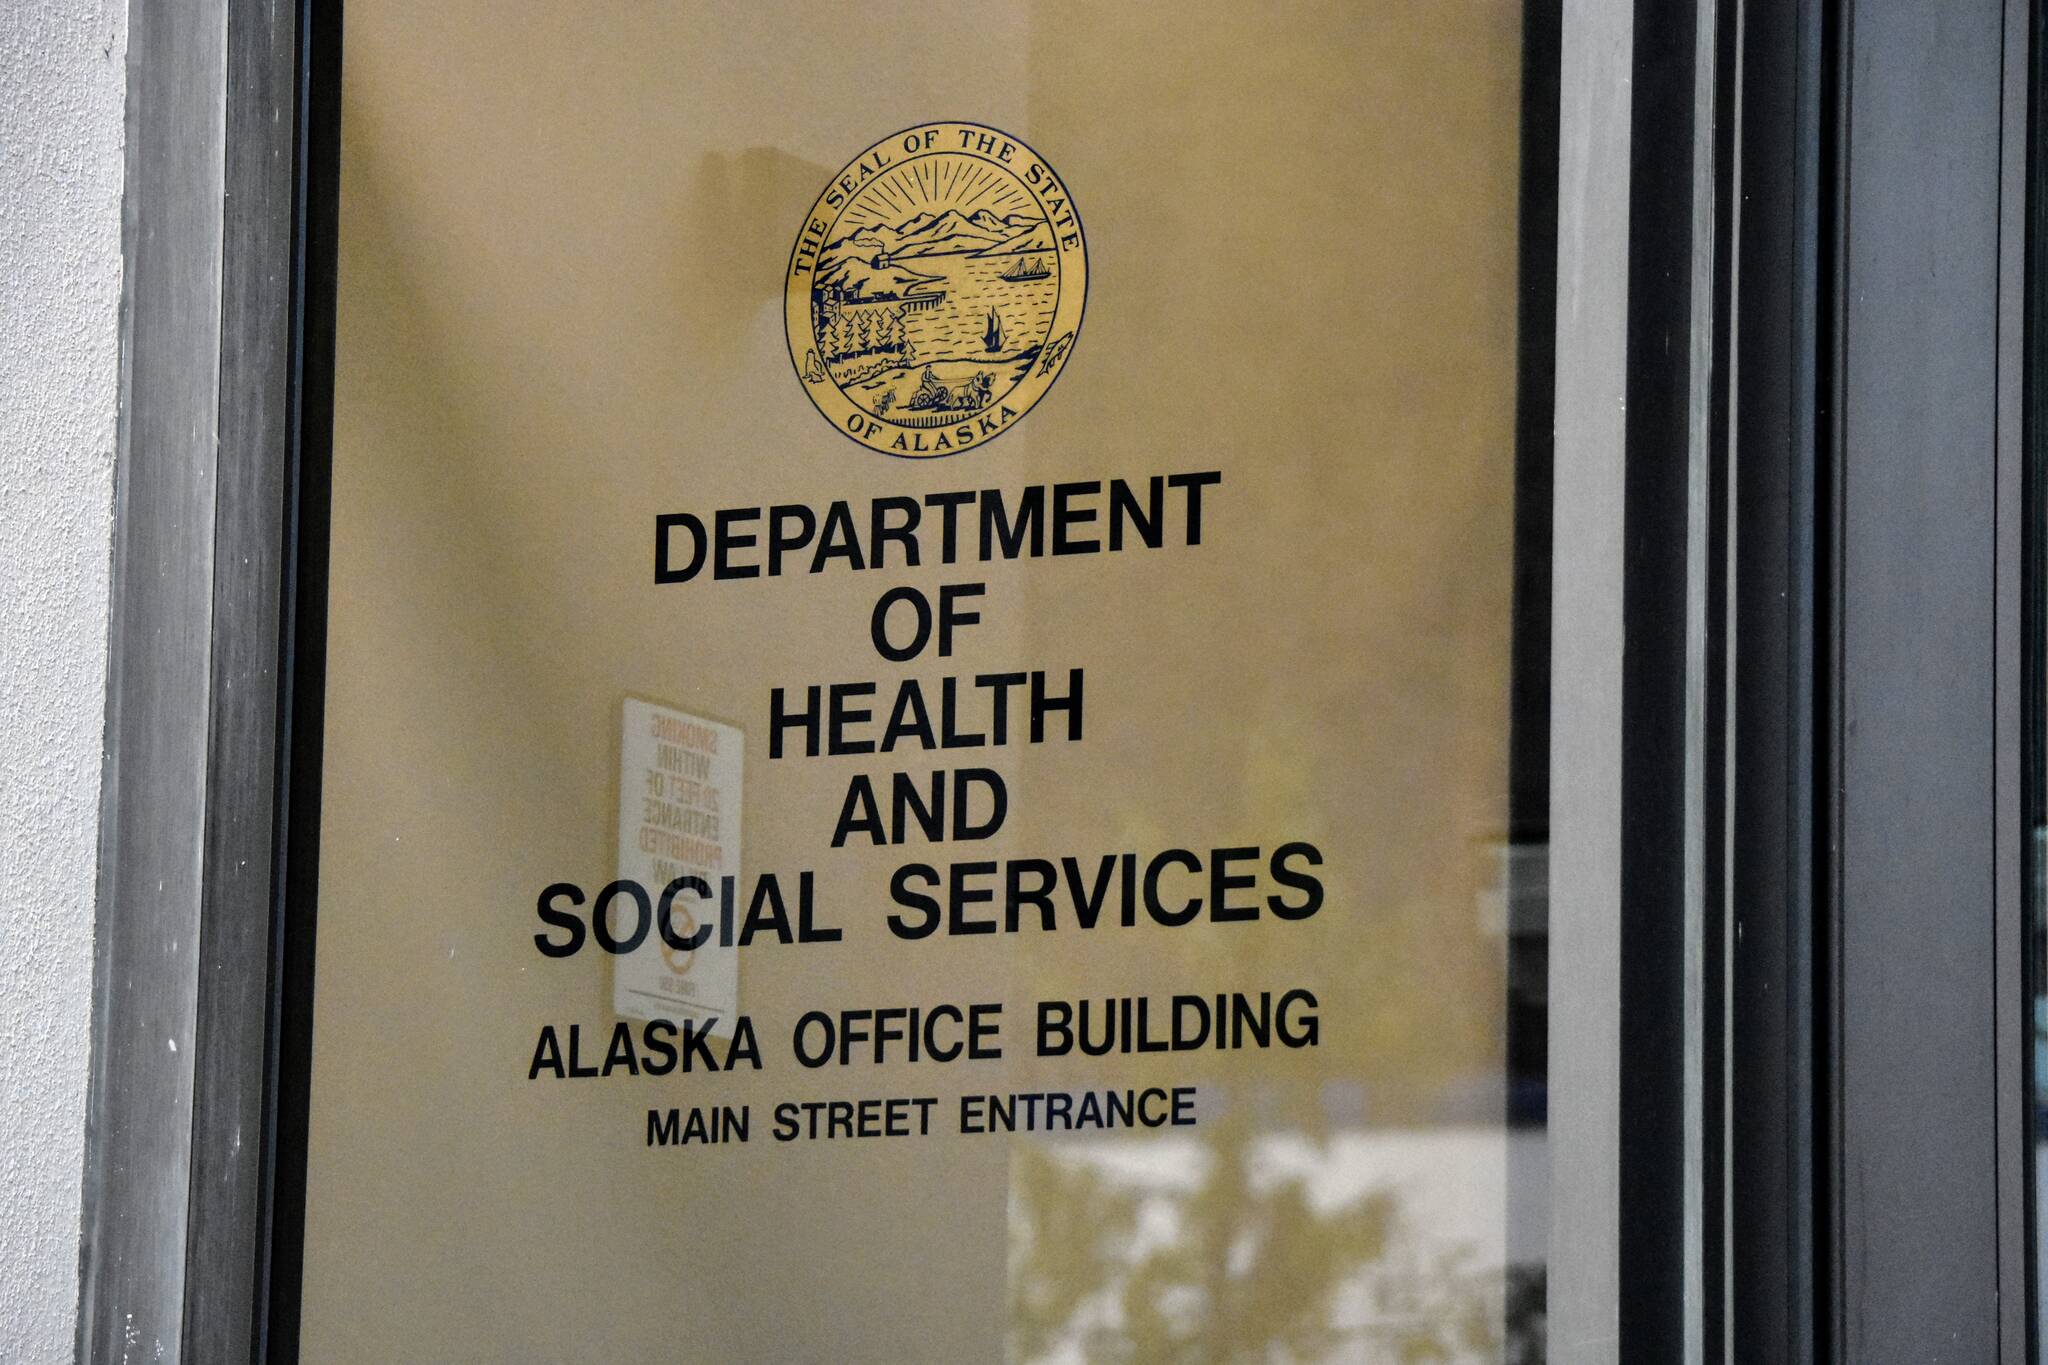 Gov. Mike Dunleavy's executive order to split the Department of Health and Social Services, its Juneau offices seen here on Monday, March 21, 2022, into two new departments became law over the weekend, but the split won't go into effect until July. (Peter Segall / Juneau Empire)